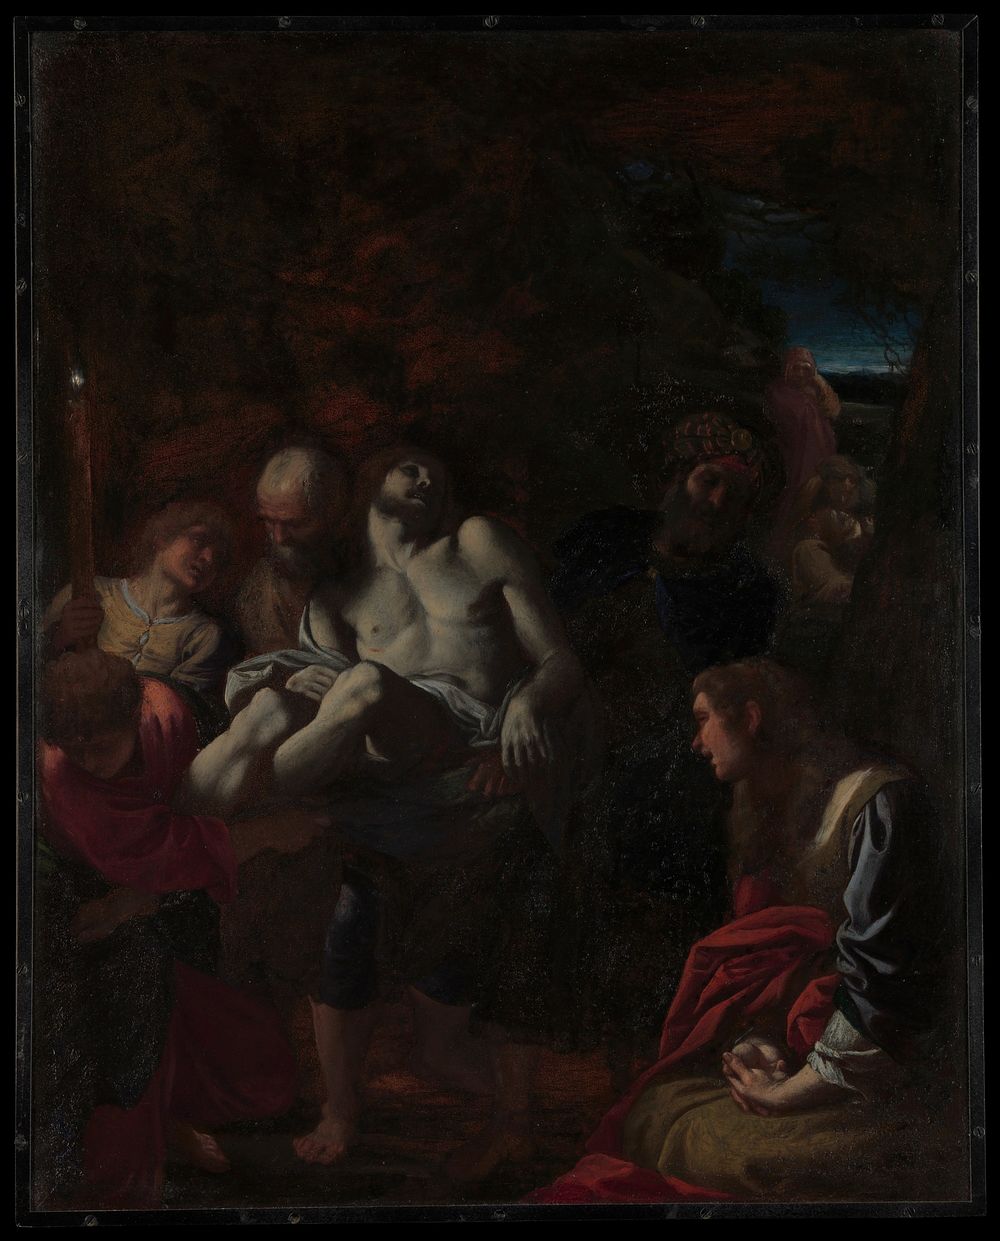 The Burial of Christ by Annibale Carracci